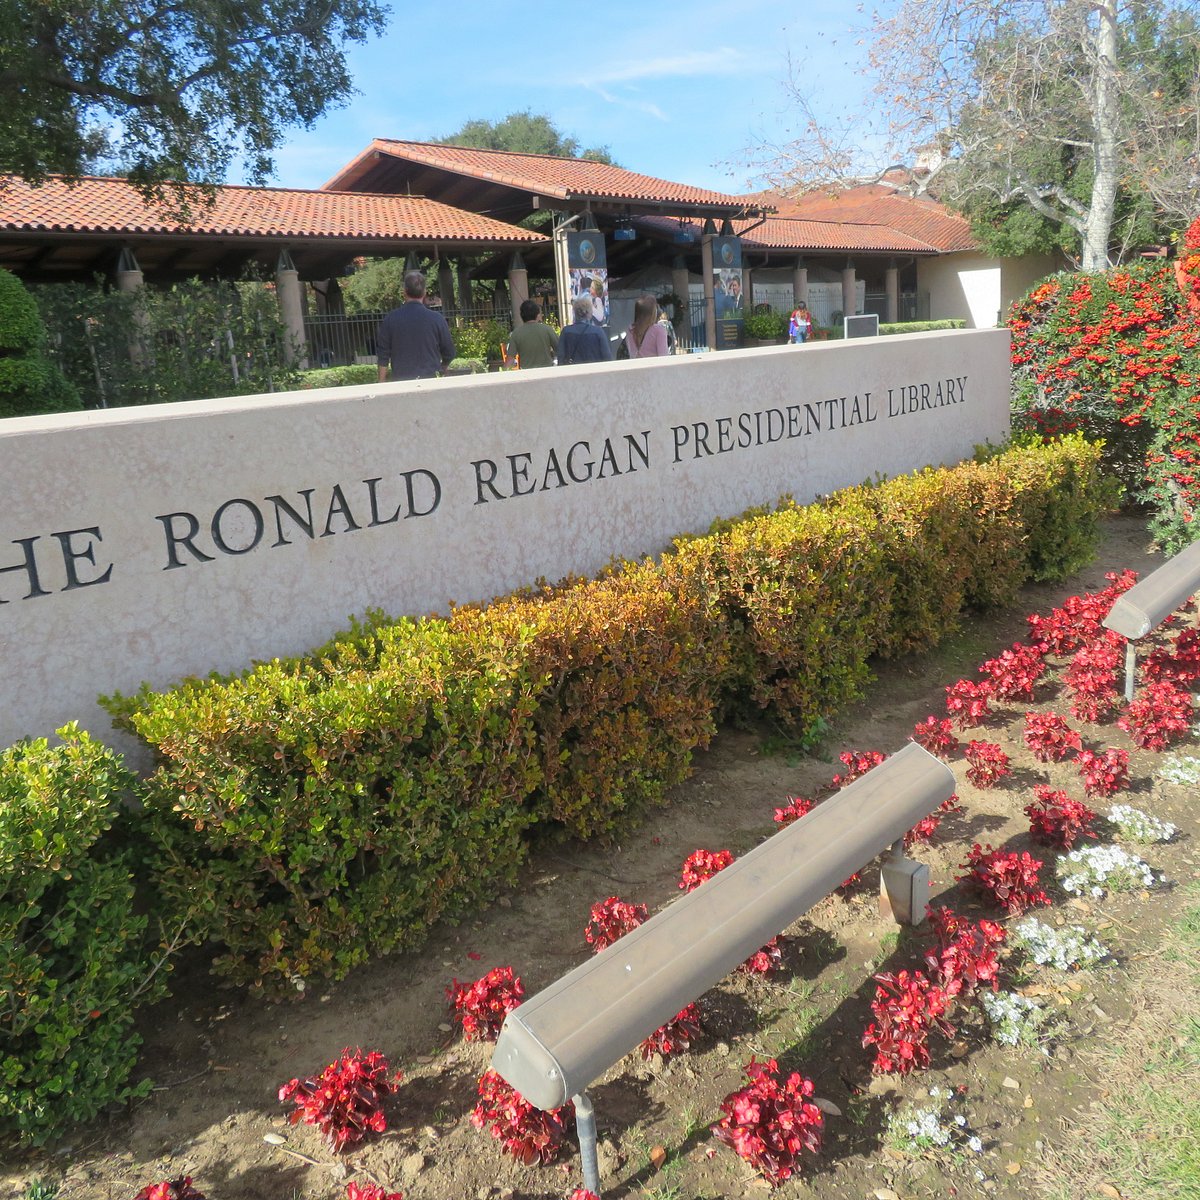 Ronald Reagan Presidential Library and Museum (Simi Valley) 2022